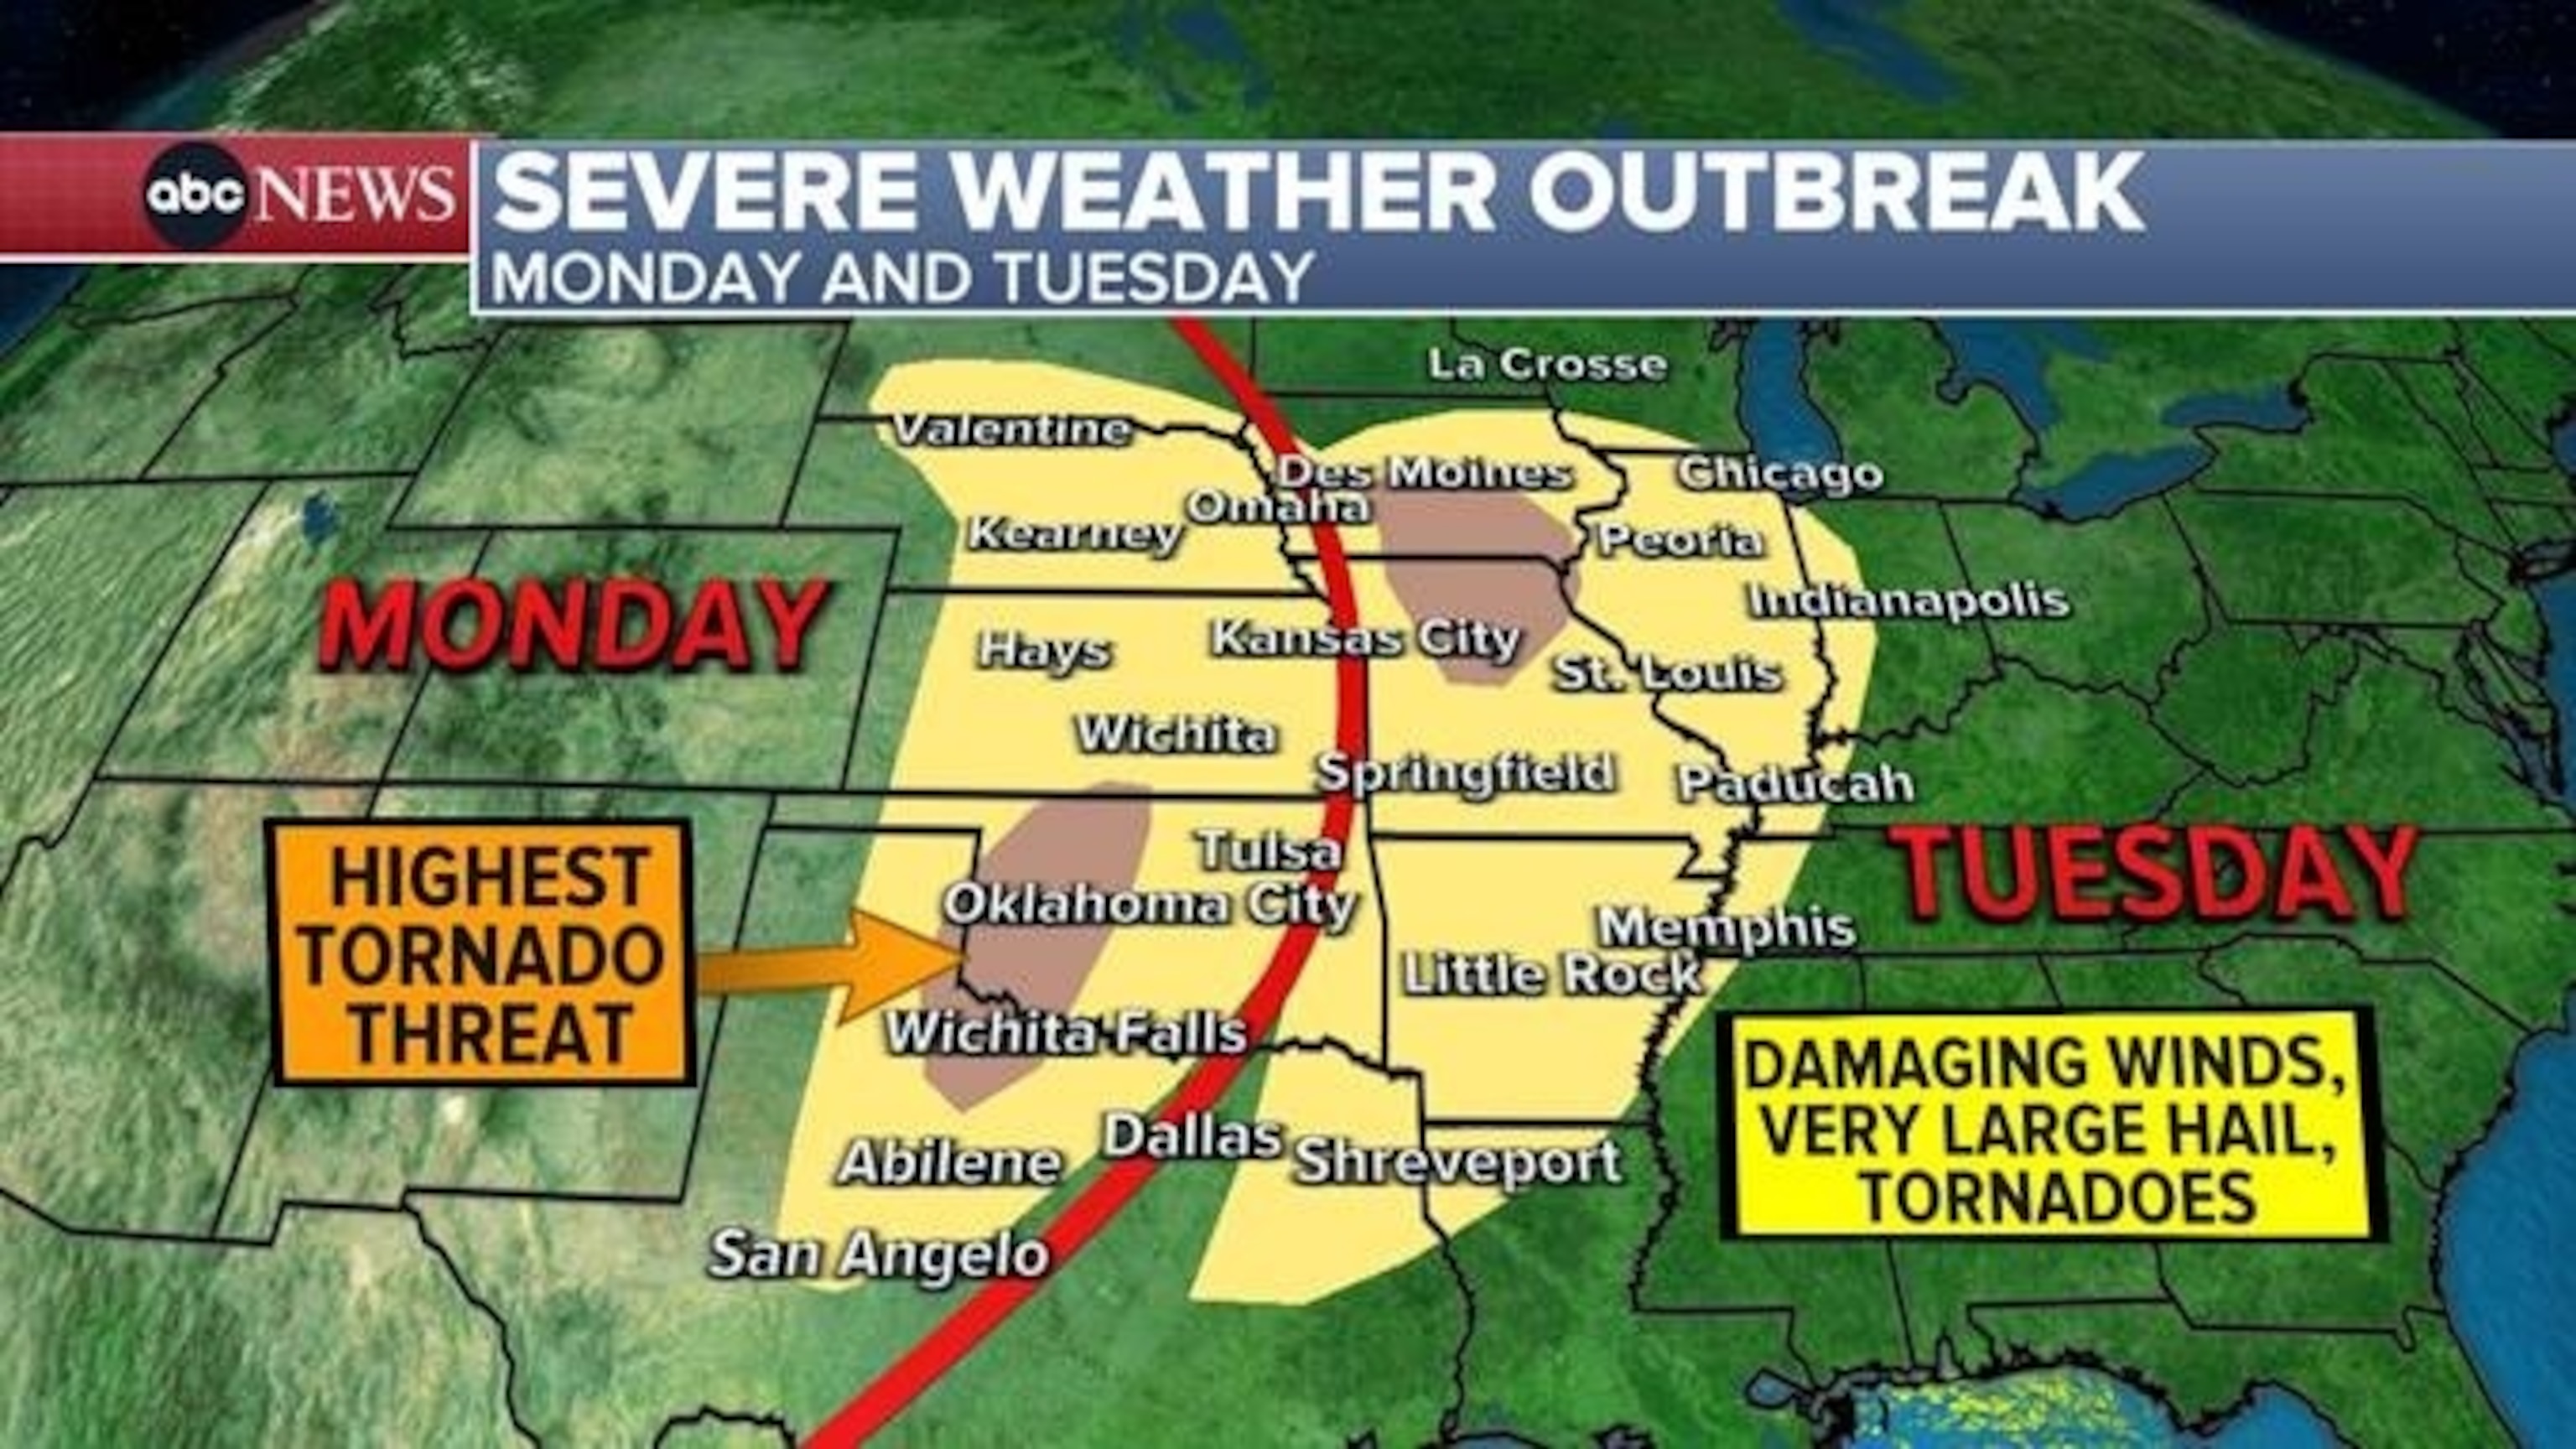 PHOTO: Severe weather outbreak forecast for Monday and Tuesday.